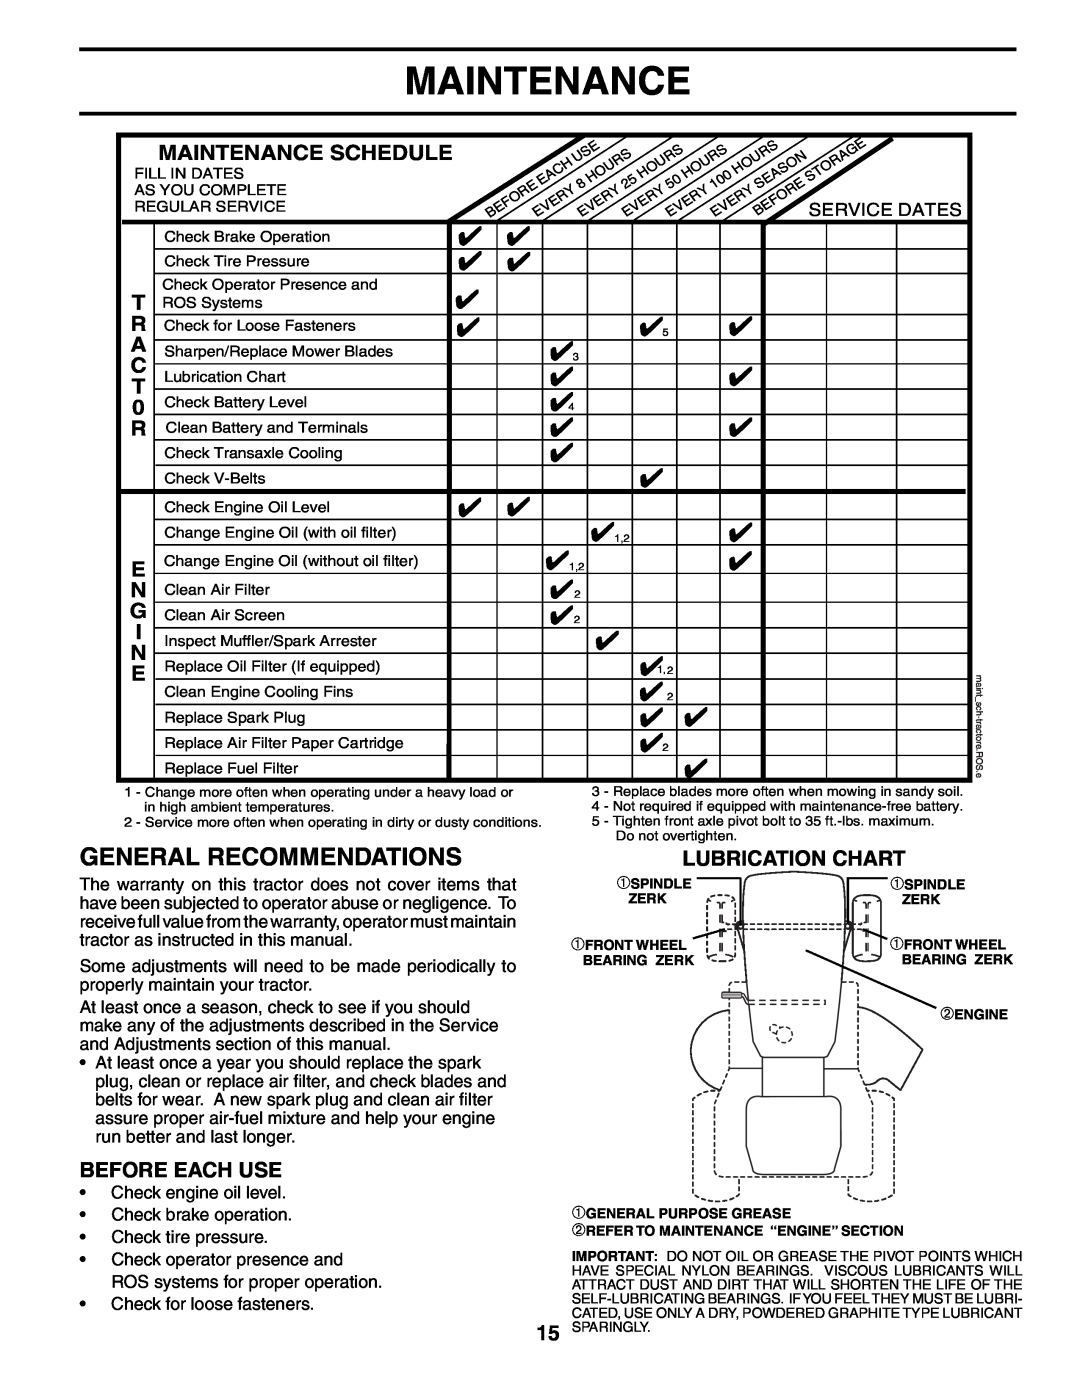 Poulan 194831 manual General Recommendations, Lubrication Chart, Before Each Use, Maintenance Schedule 